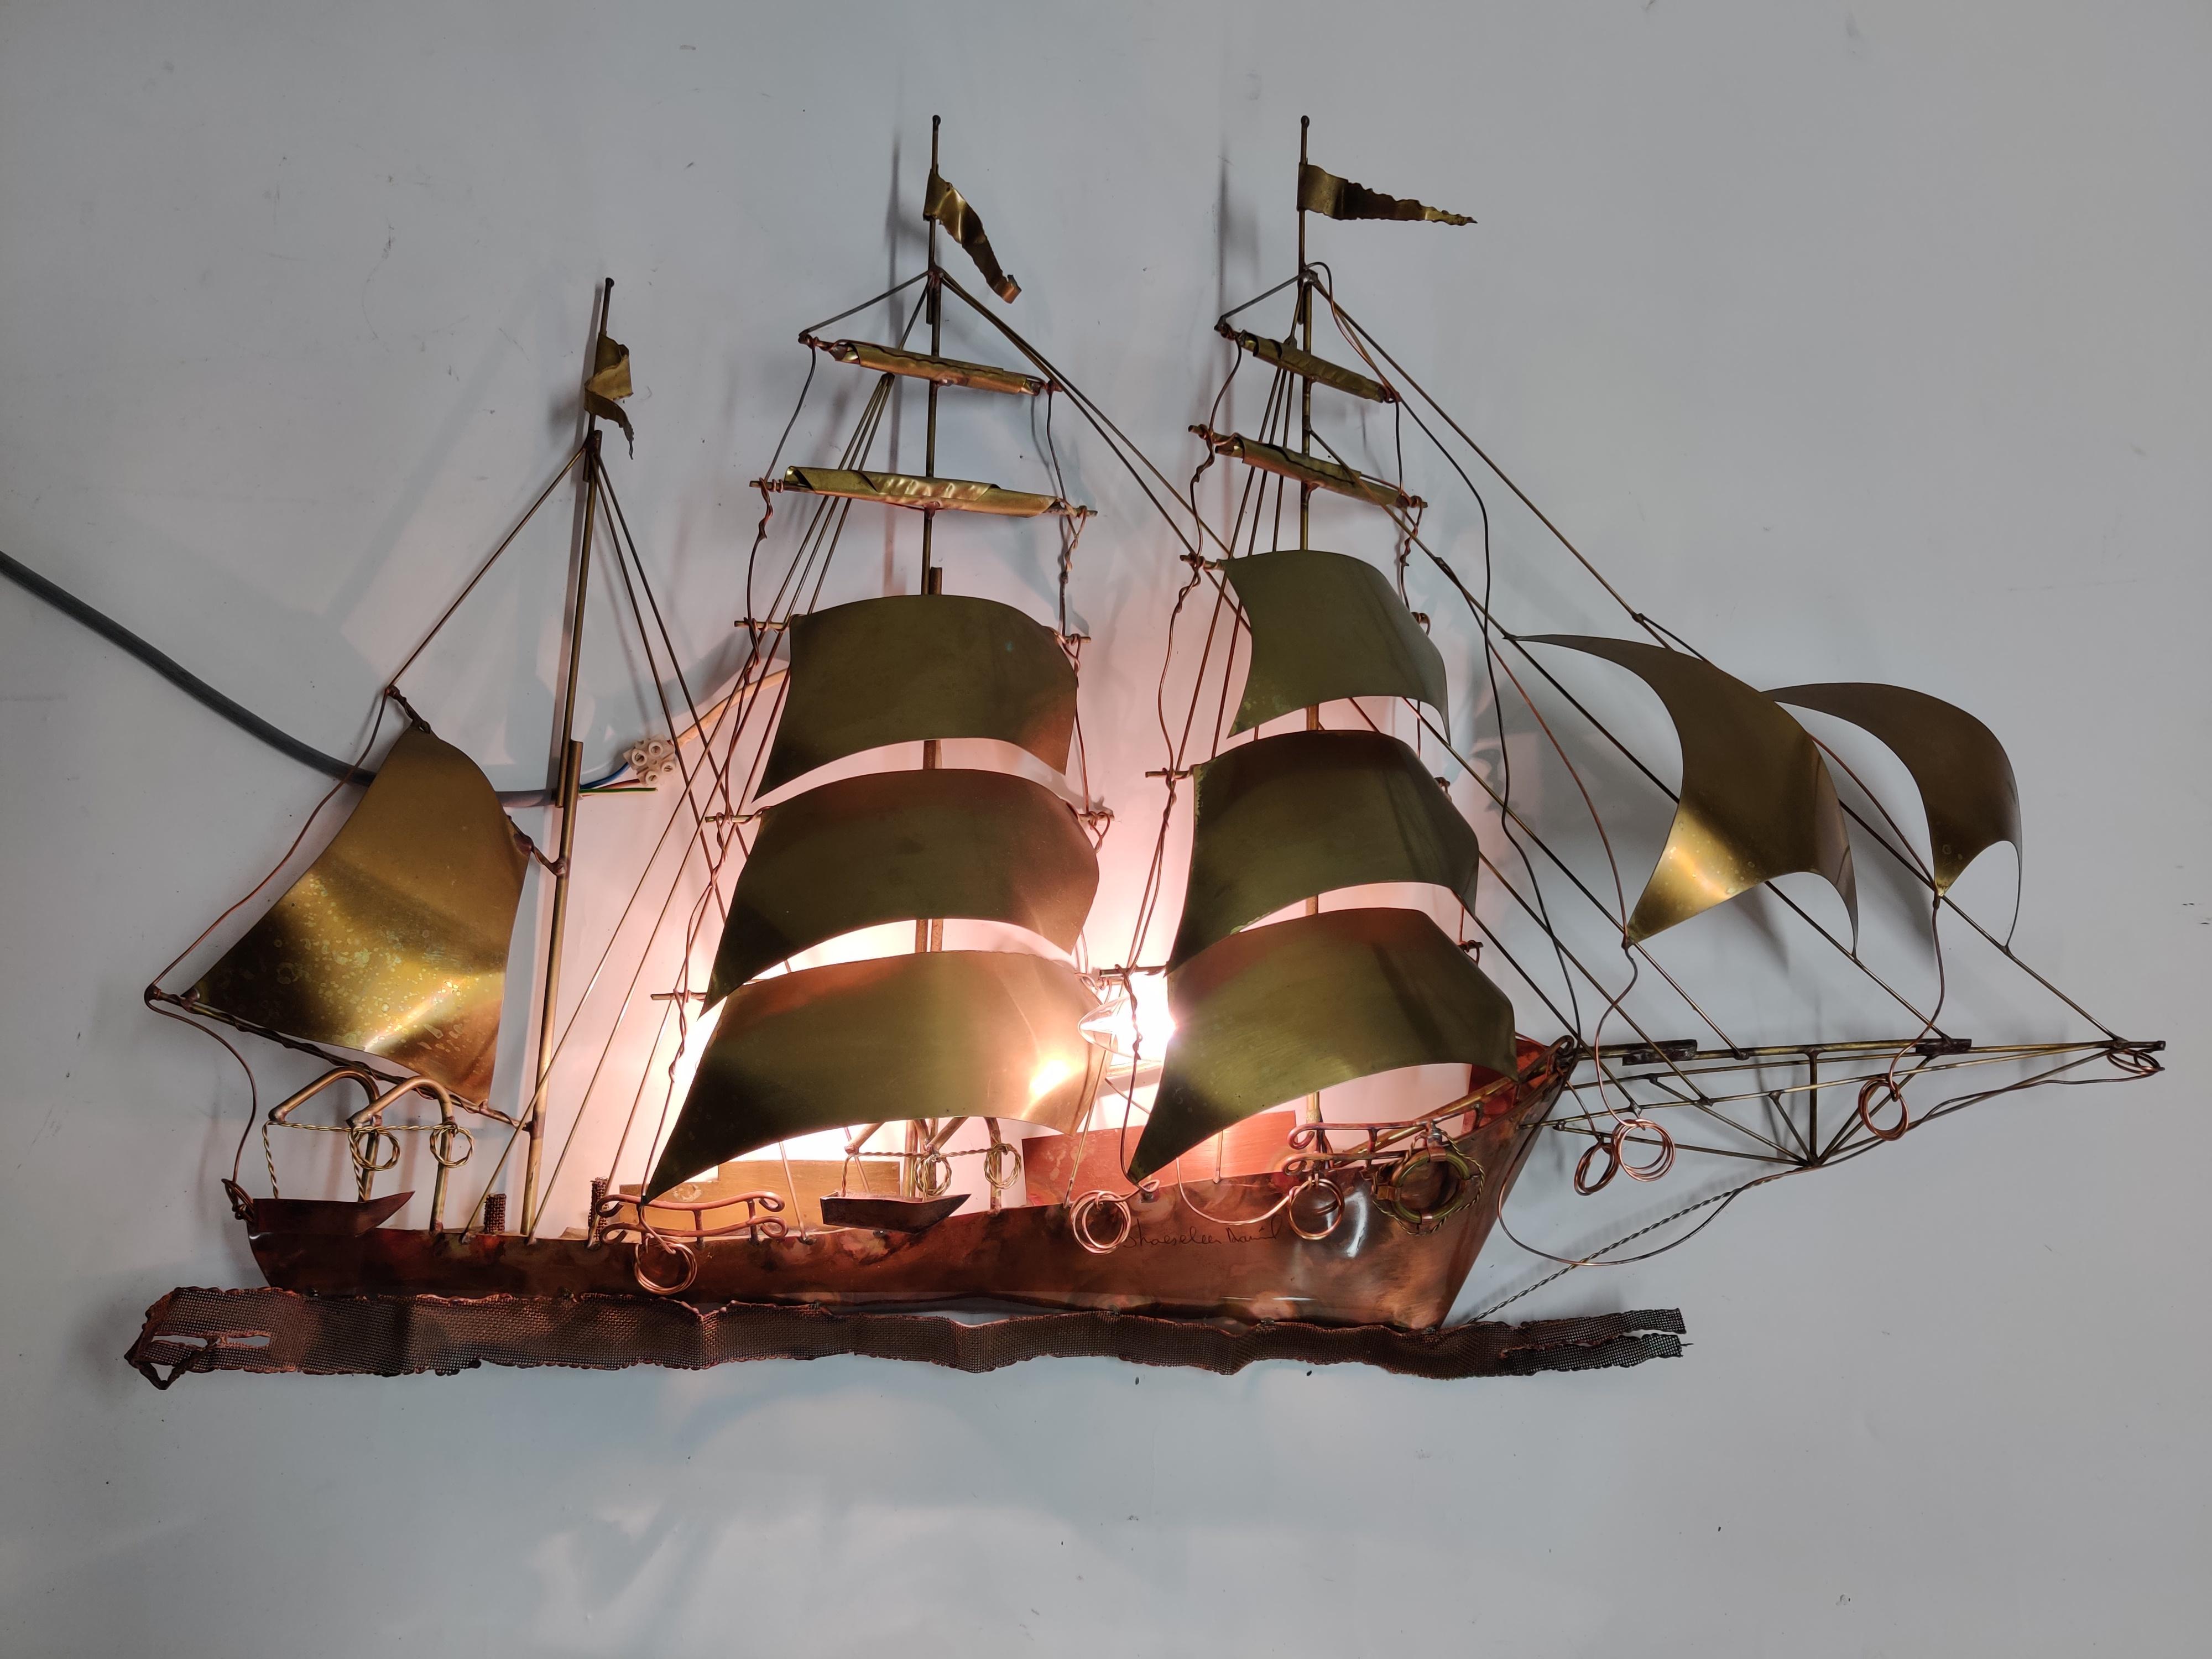 A very rare wall light sculpture in solid copper and brass designed and made in the 1970s by the Belgium artist Daniel d’Haeseleer. This beautiful sailing vessel comes with two light fittings for an even more beautiful effect. This sculpture emits a